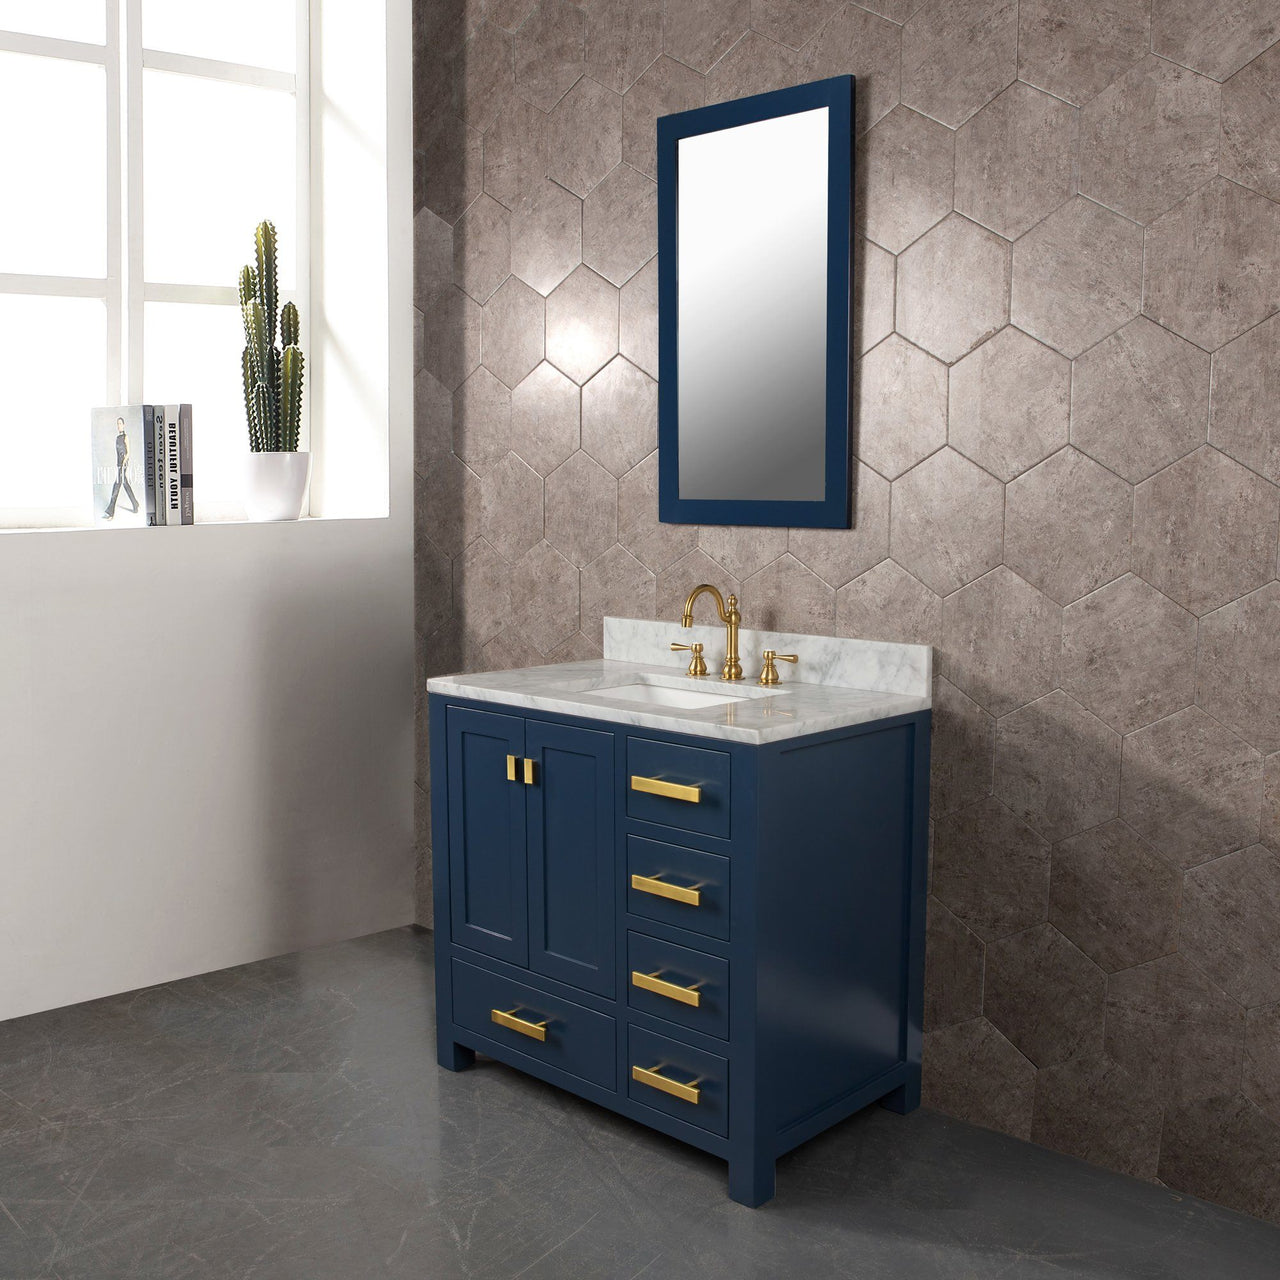 Madison 36-Inch Single Sink Carrara White Marble Vanity In Monarch Blue With Matching Mirror Vanity Water Creation 